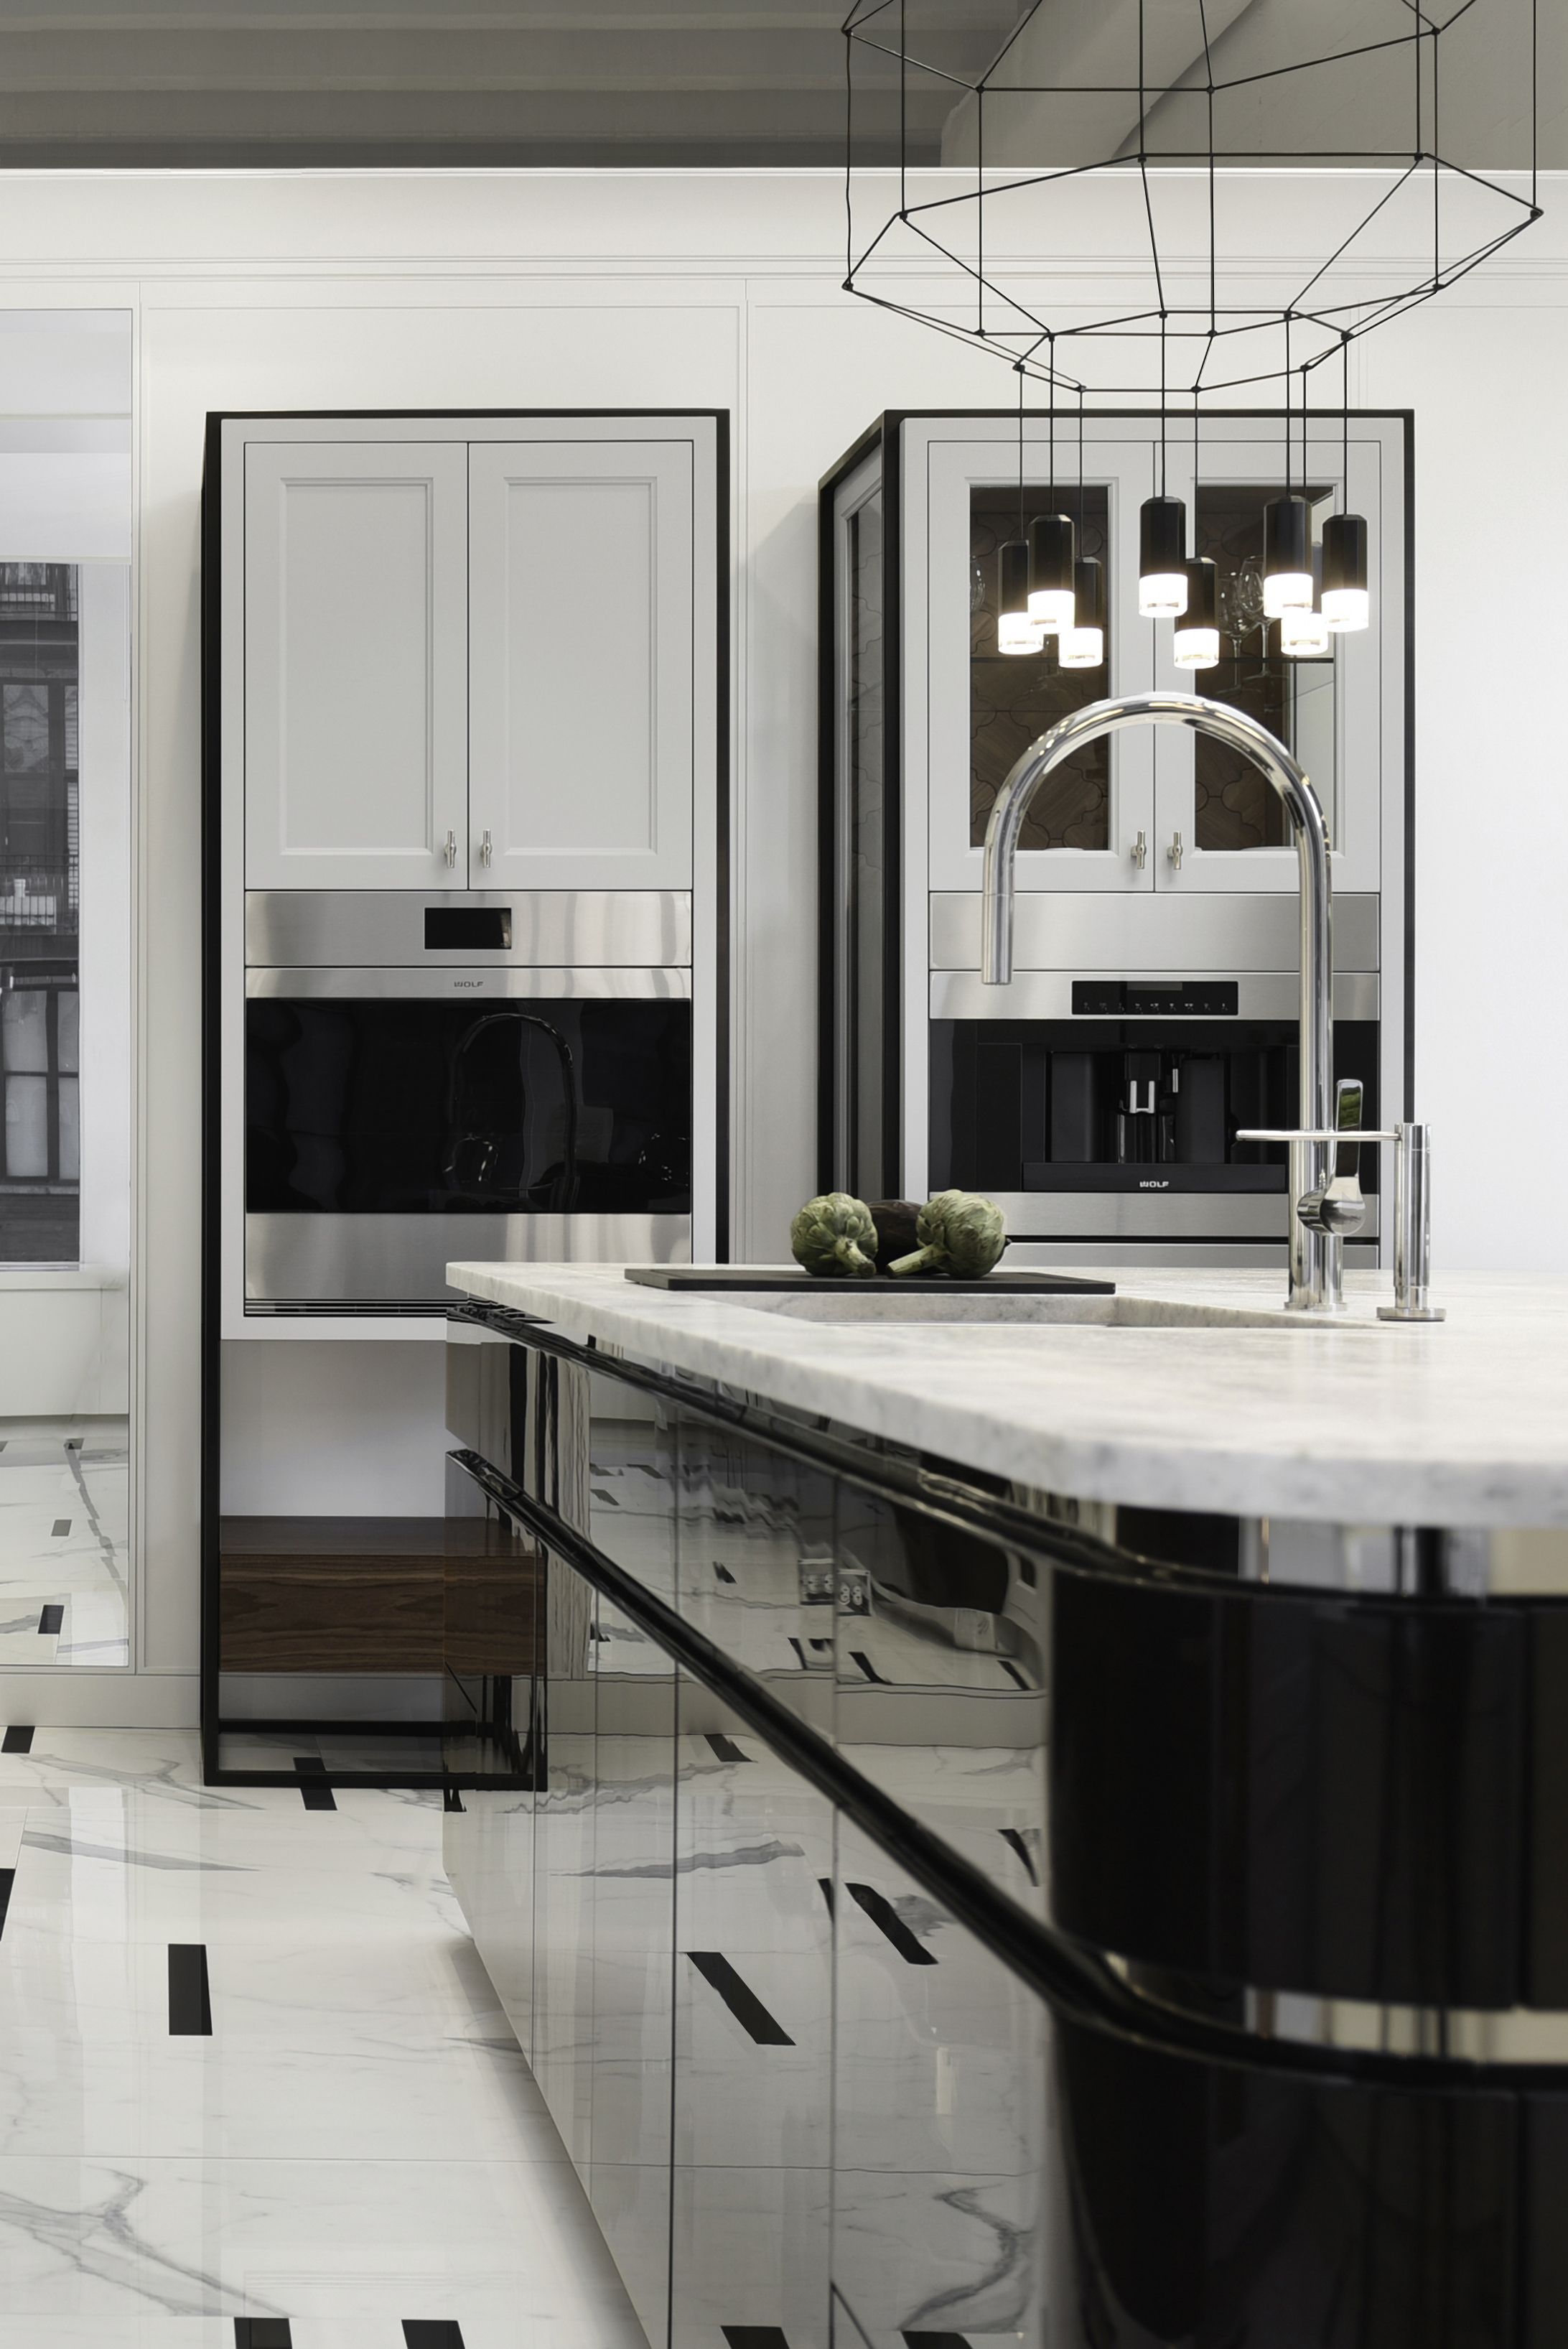 The beauty of our kitchen has been inspired by Old Hollywood glamour. The combination of wood, stone and metal as well as the use of touch-latch mechanism has allowed us to achieve a clean and sleek look.